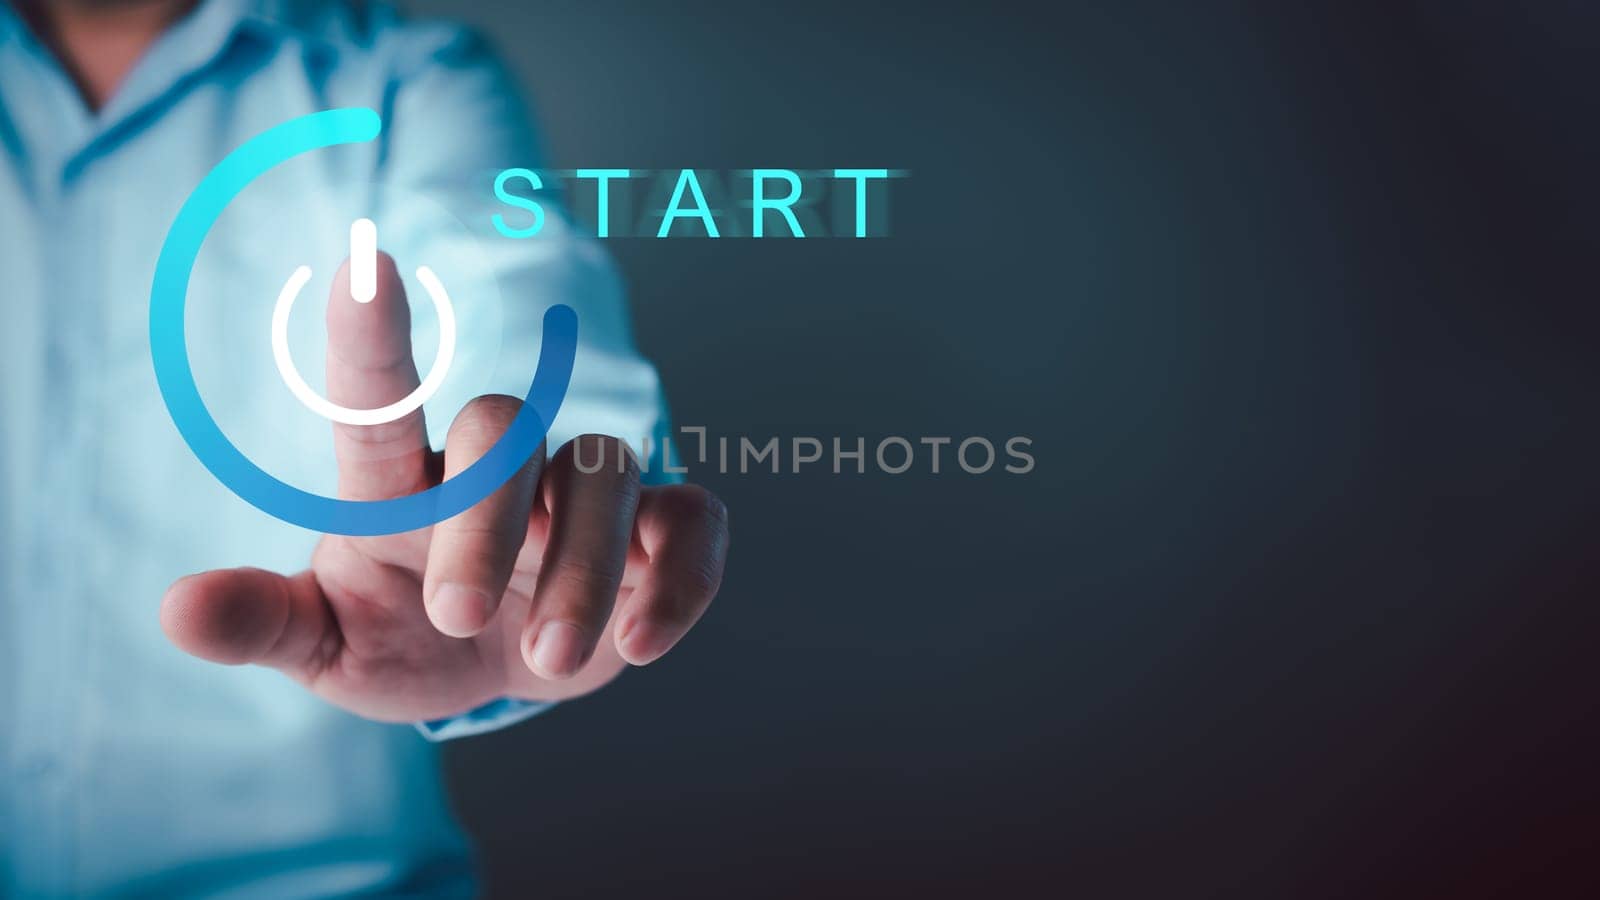 Startup business concept, Businessman hand pressing the start button, The Startup concept plan development business project digital technology idea of leadership, strategy Startup growth. by Unimages2527